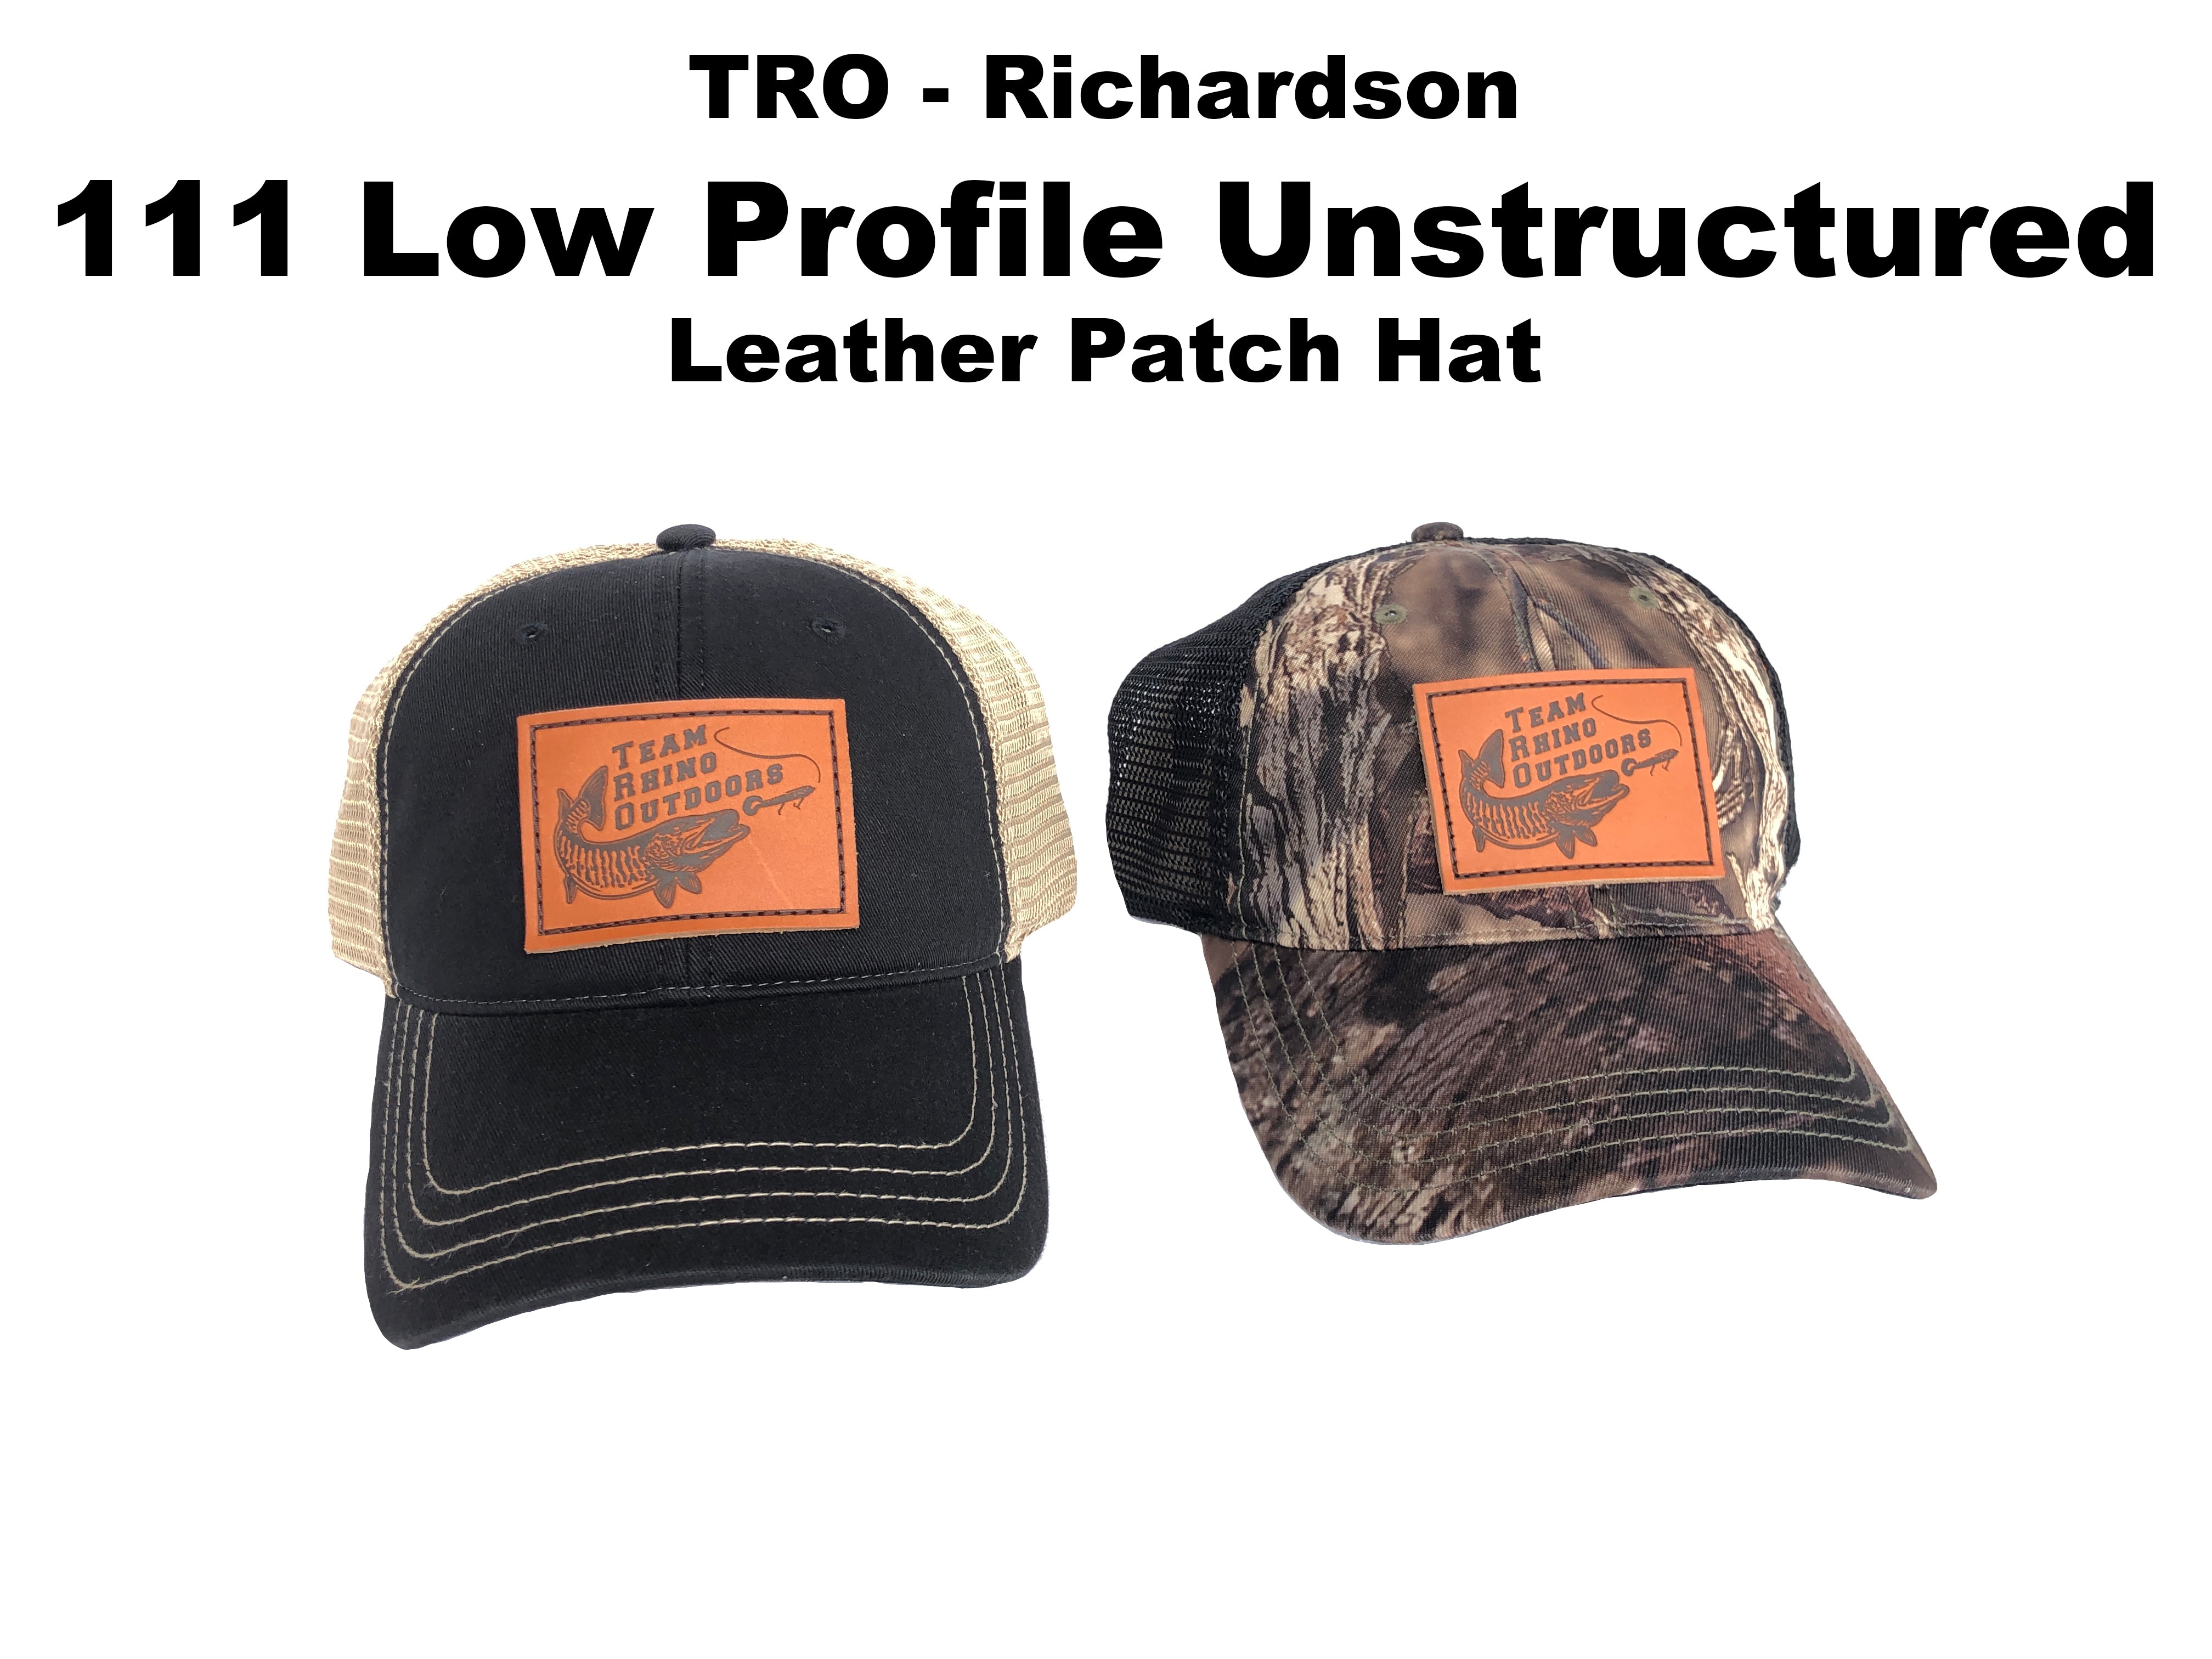 Patch On Patch Low Pro Trucker Hat